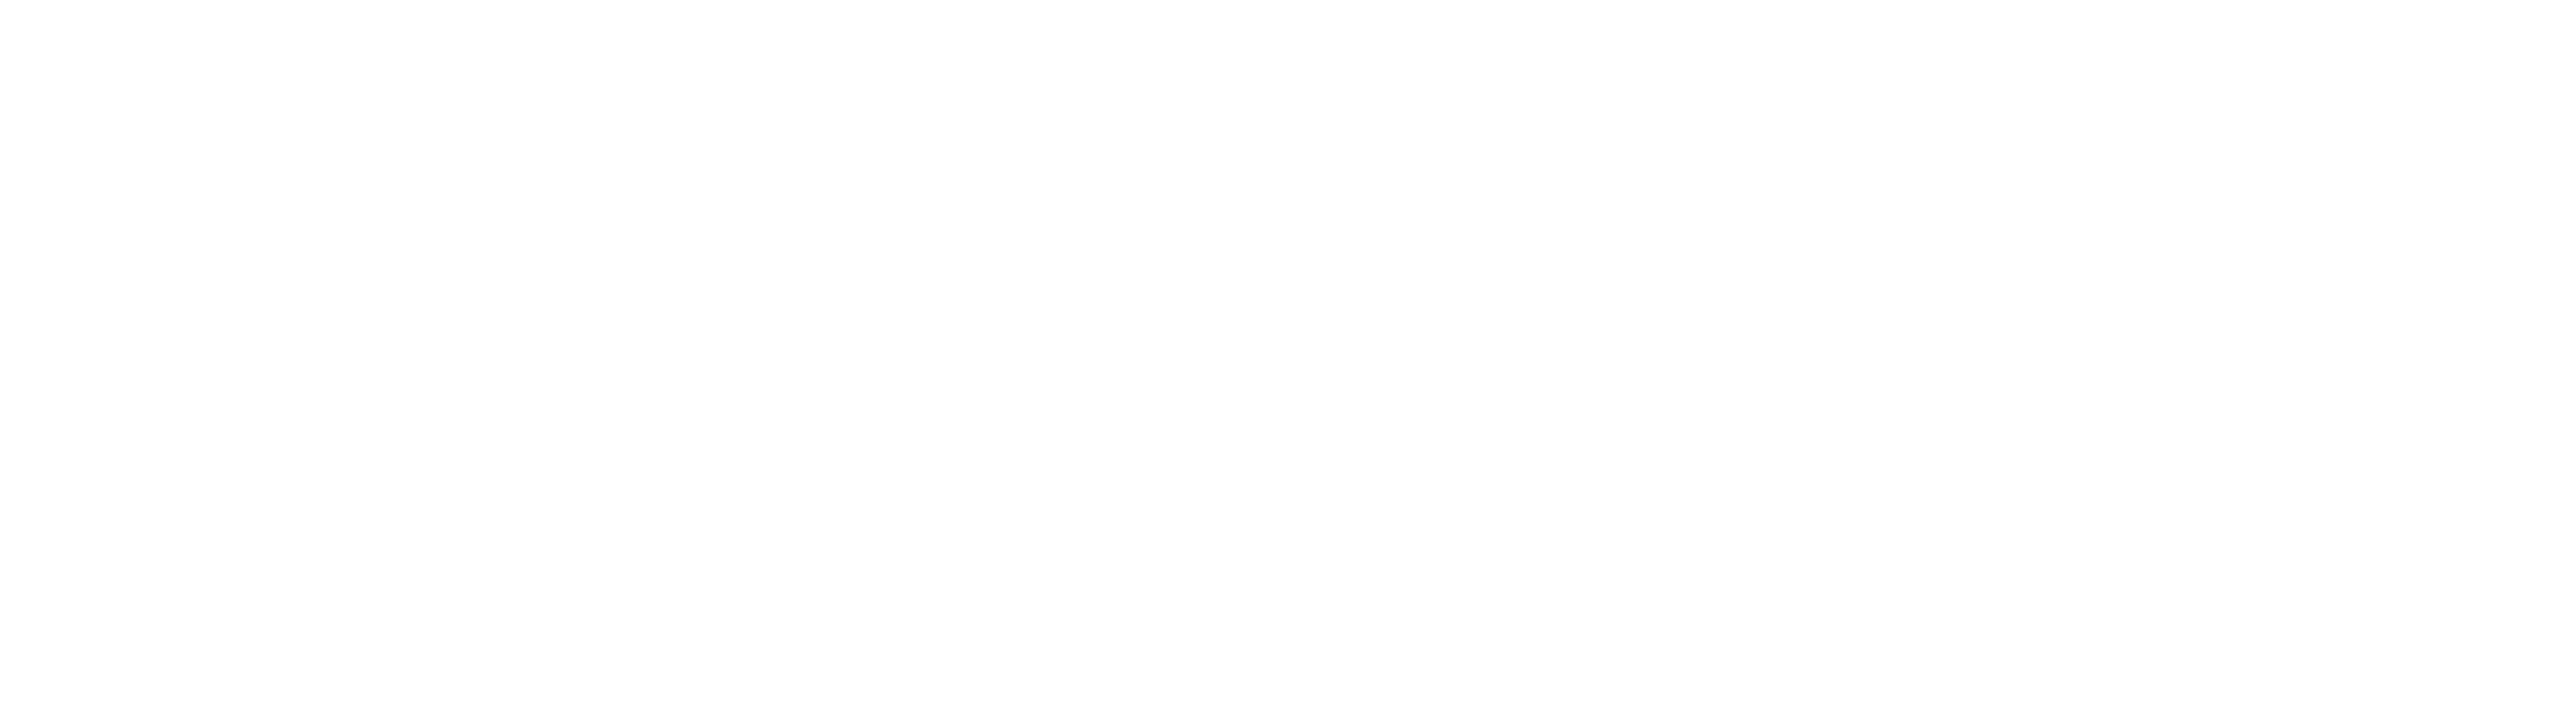 PPC Ads for Higher Education | Morehouse College logo